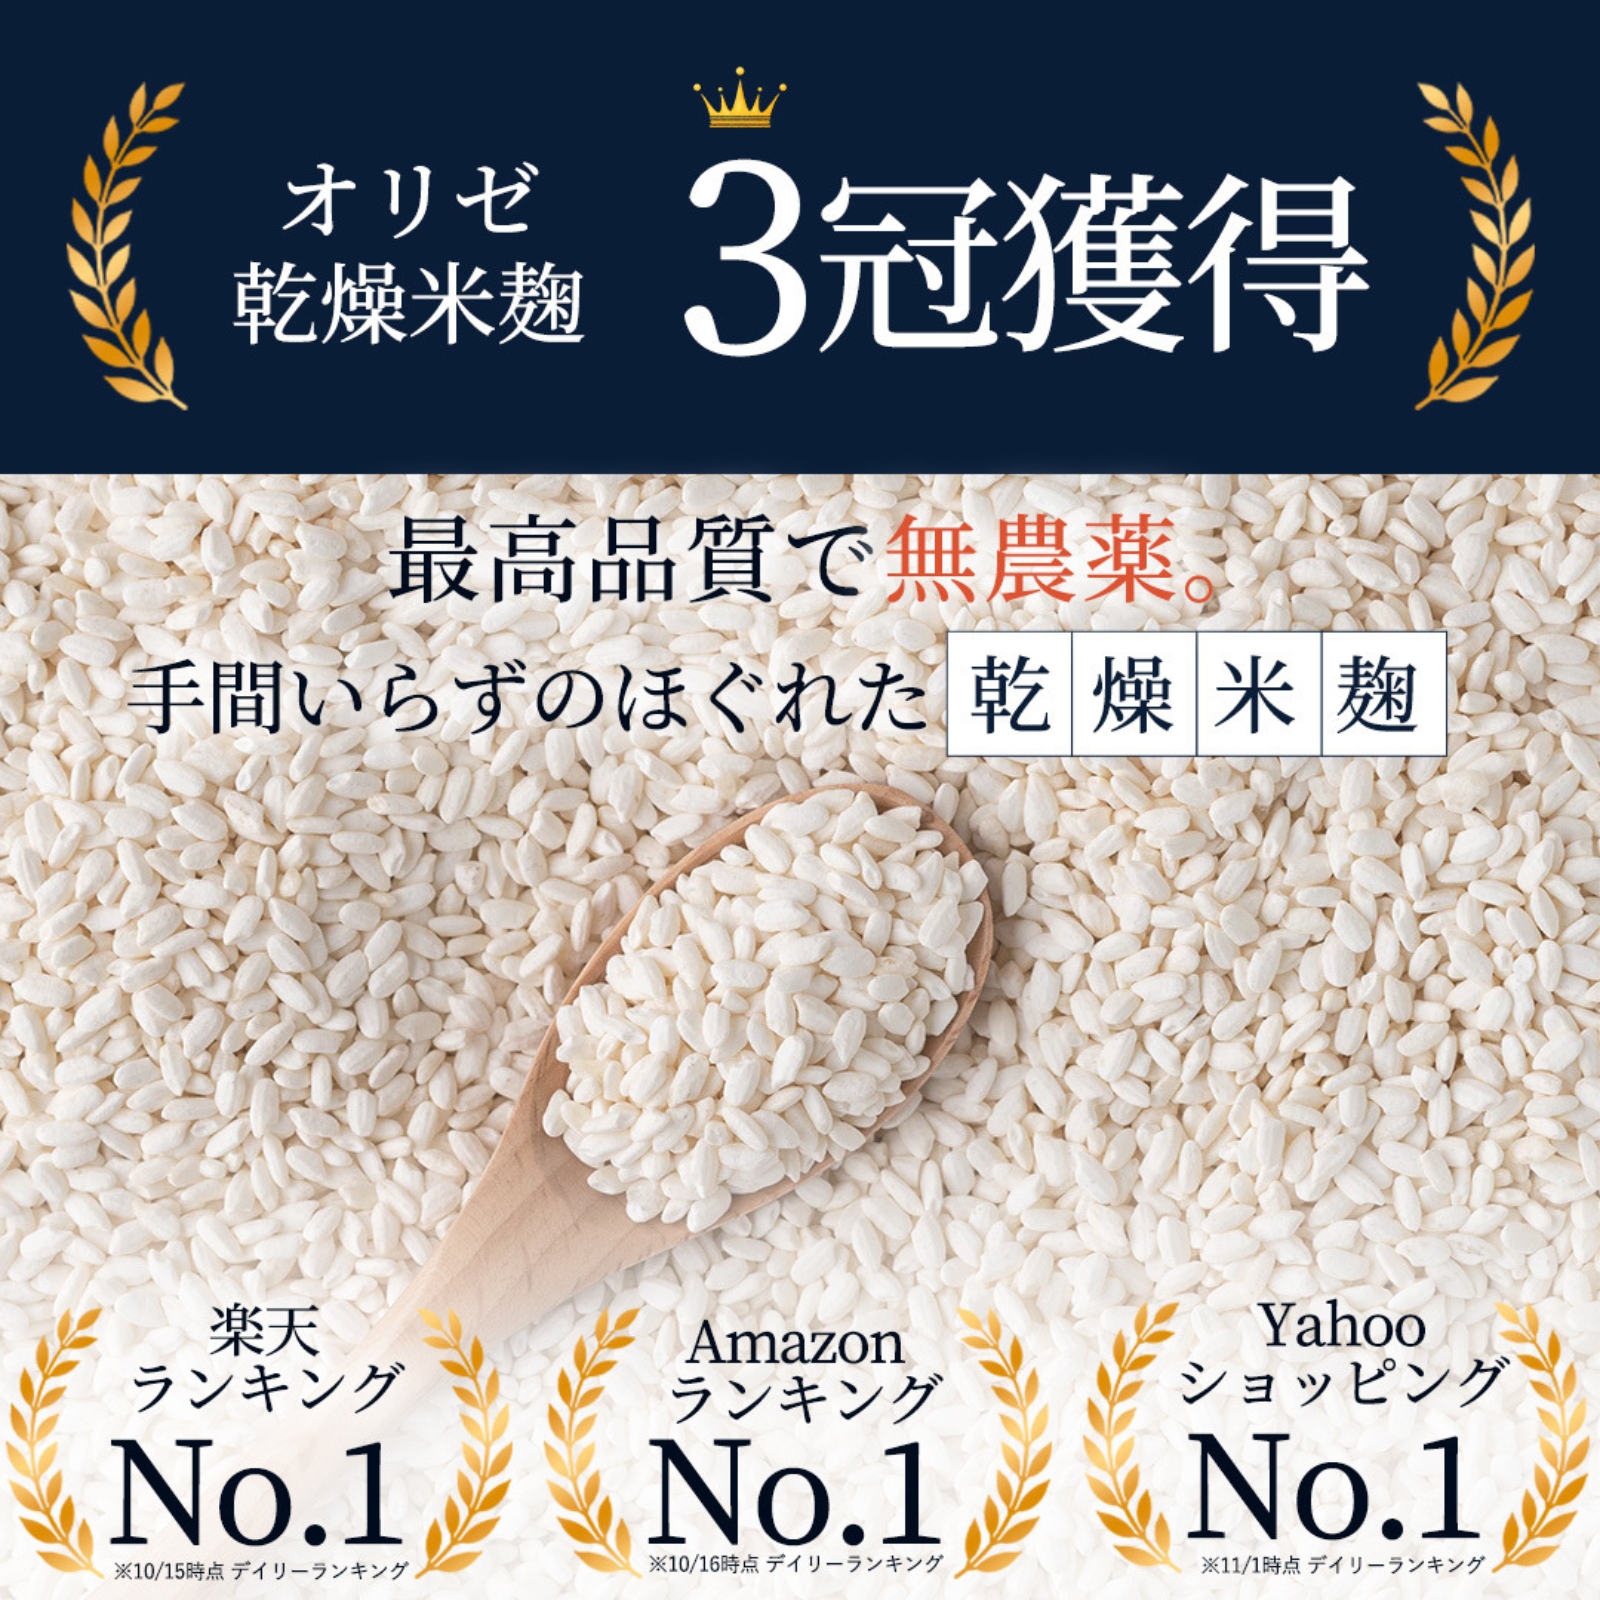 o Rize dry rice .1.6kg less pesticide domestic production no addition rice .. handmade salt . soy sauce . taste . making sweet sake amazake ... dry .. rice field commercial firm navy blue label 